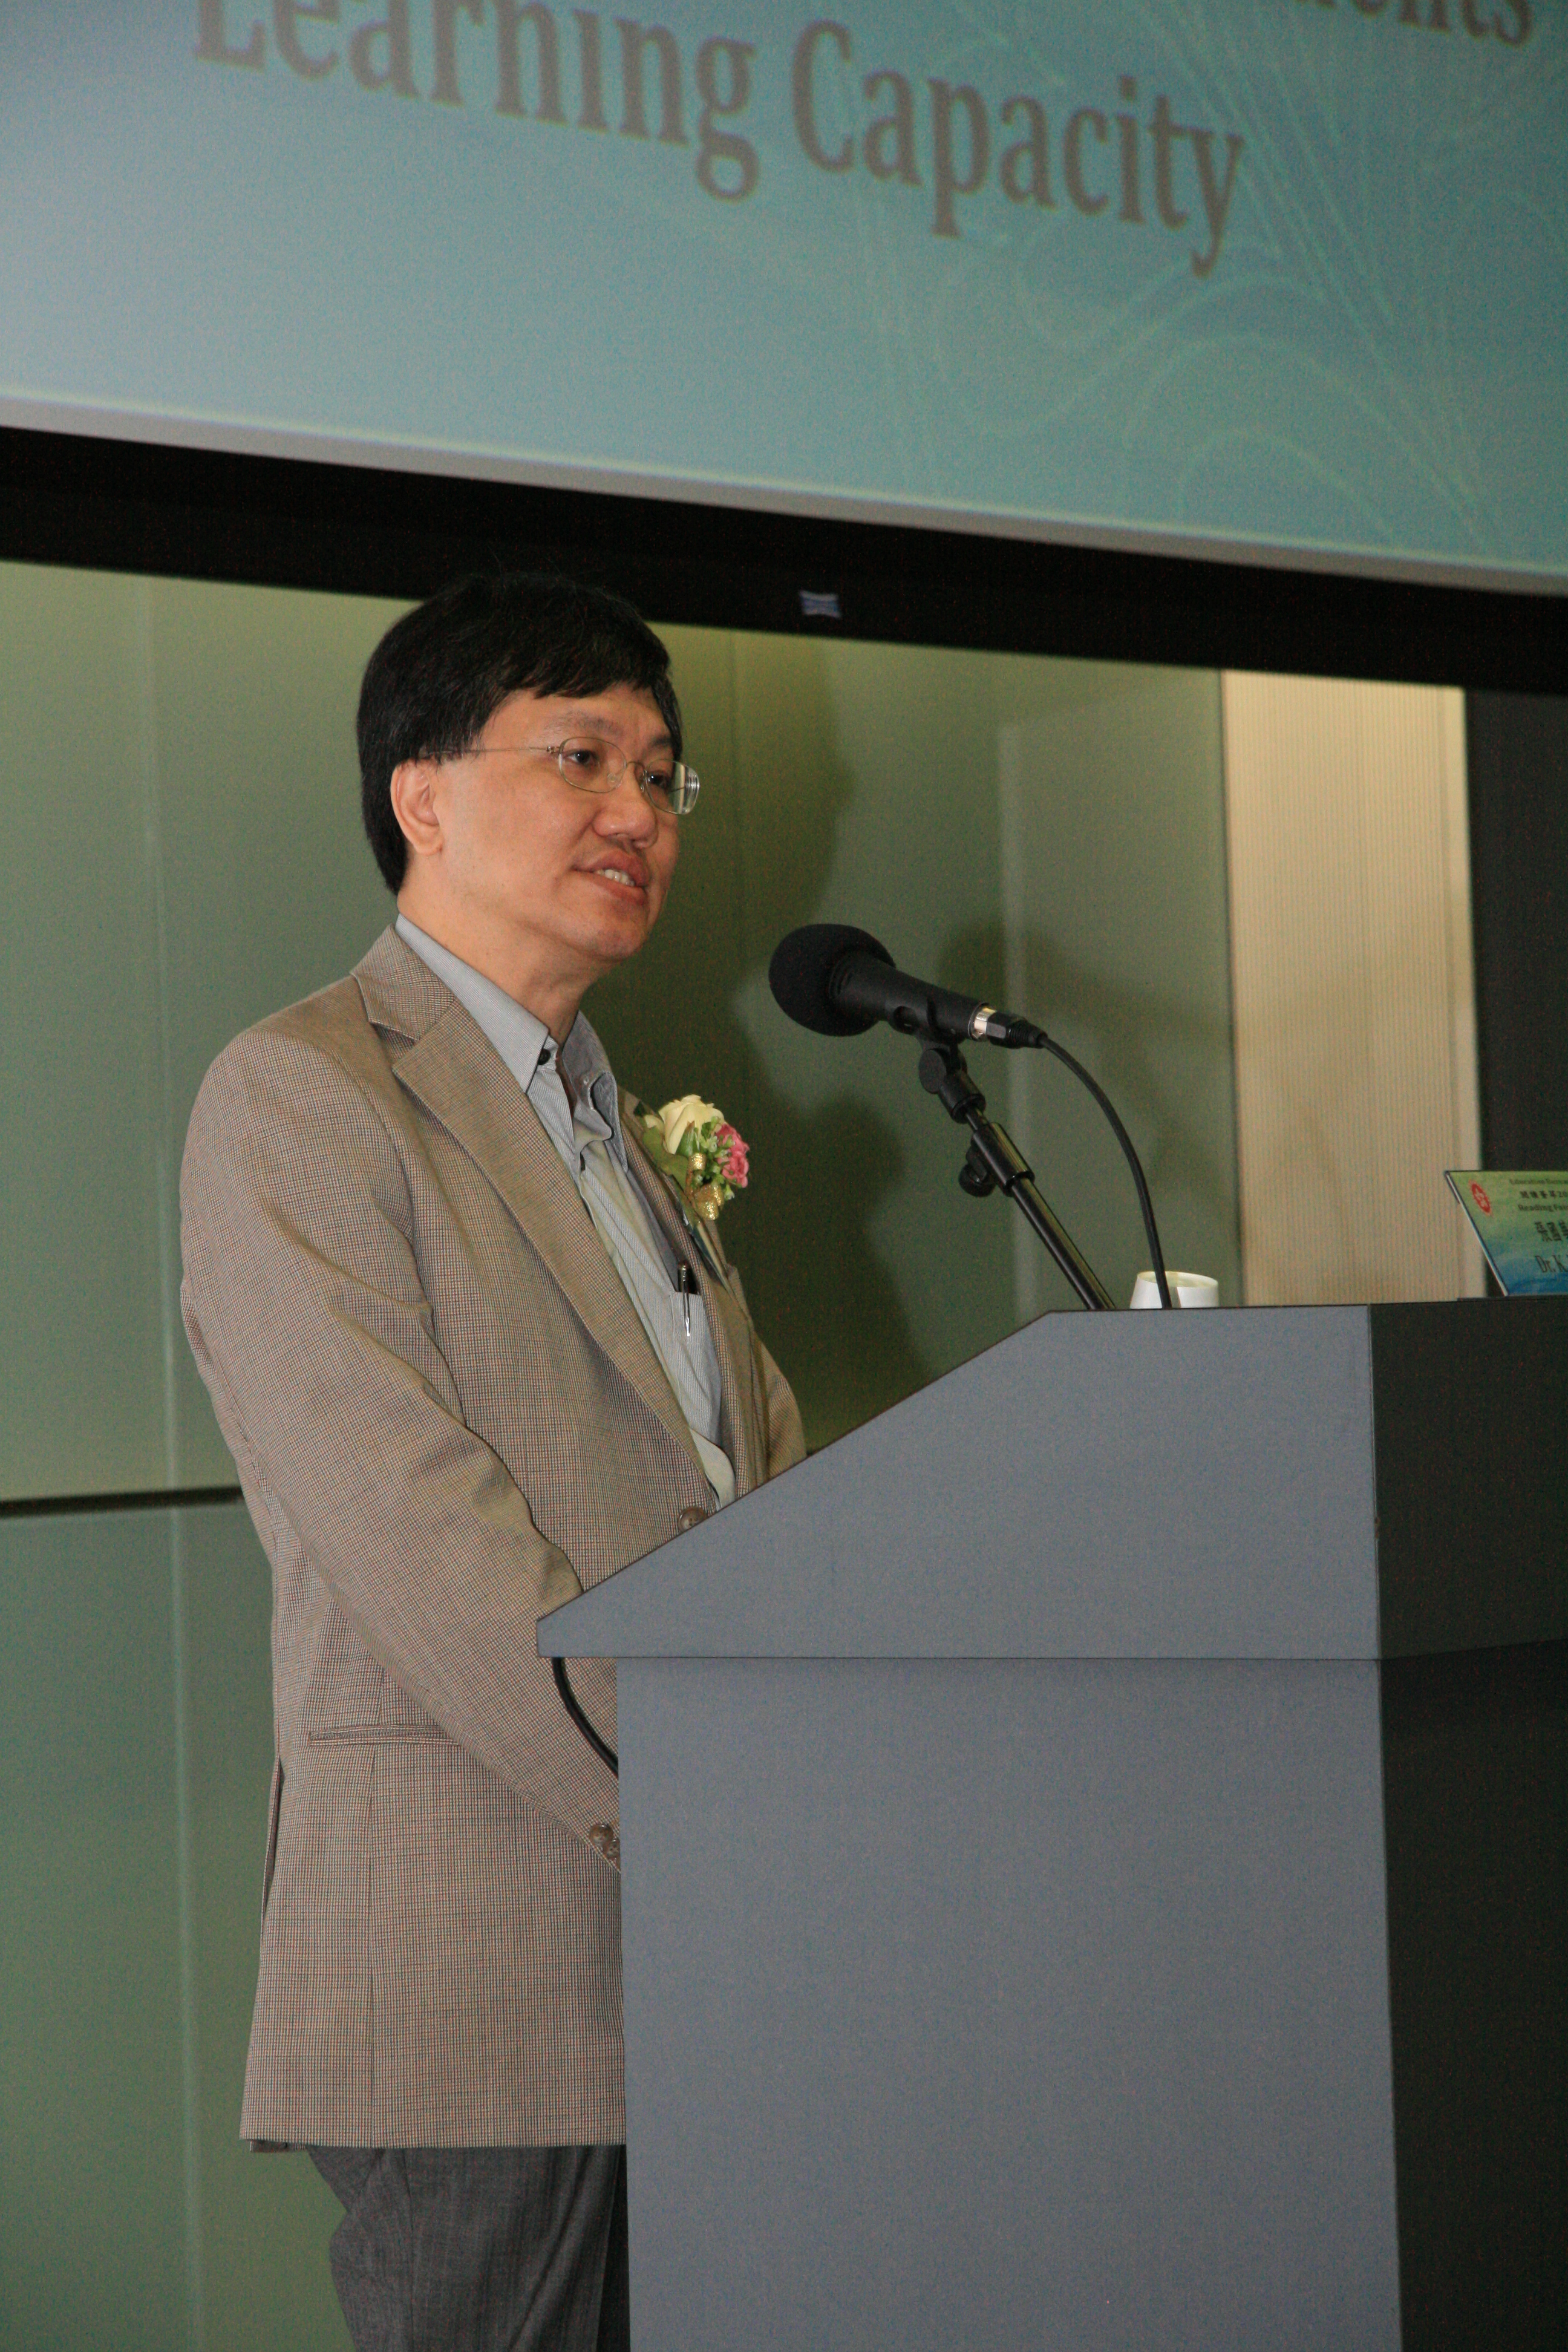 Dr. K. W. CHEUNG, Principal Assistant Secretary (Curriculum Development), gives Opening Remarks in the Reading Fair 2012 - Strategies to Enhance Students' Learning Capacity